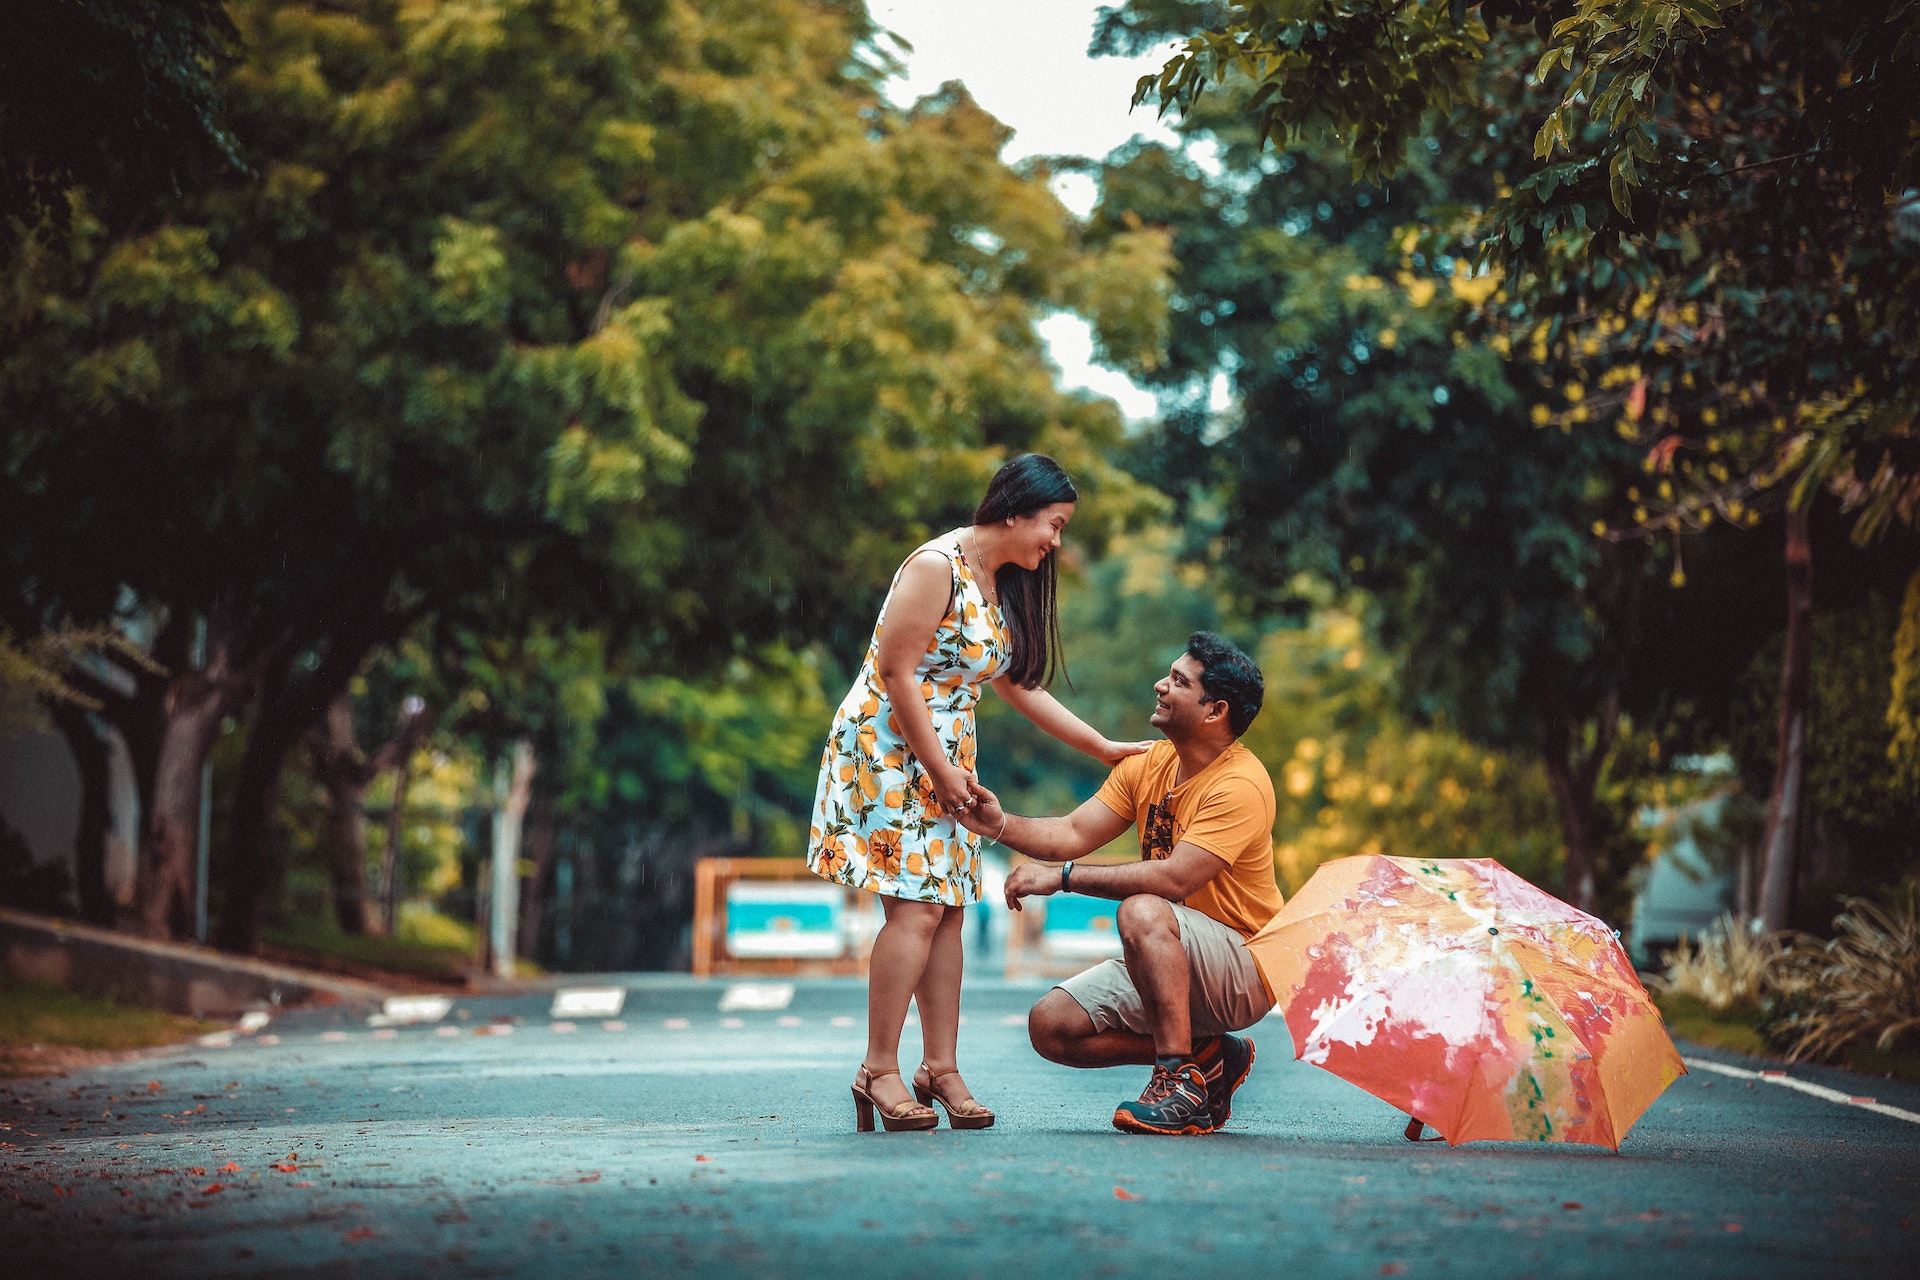 How to Make Your Proposal an Unforgettable Experience